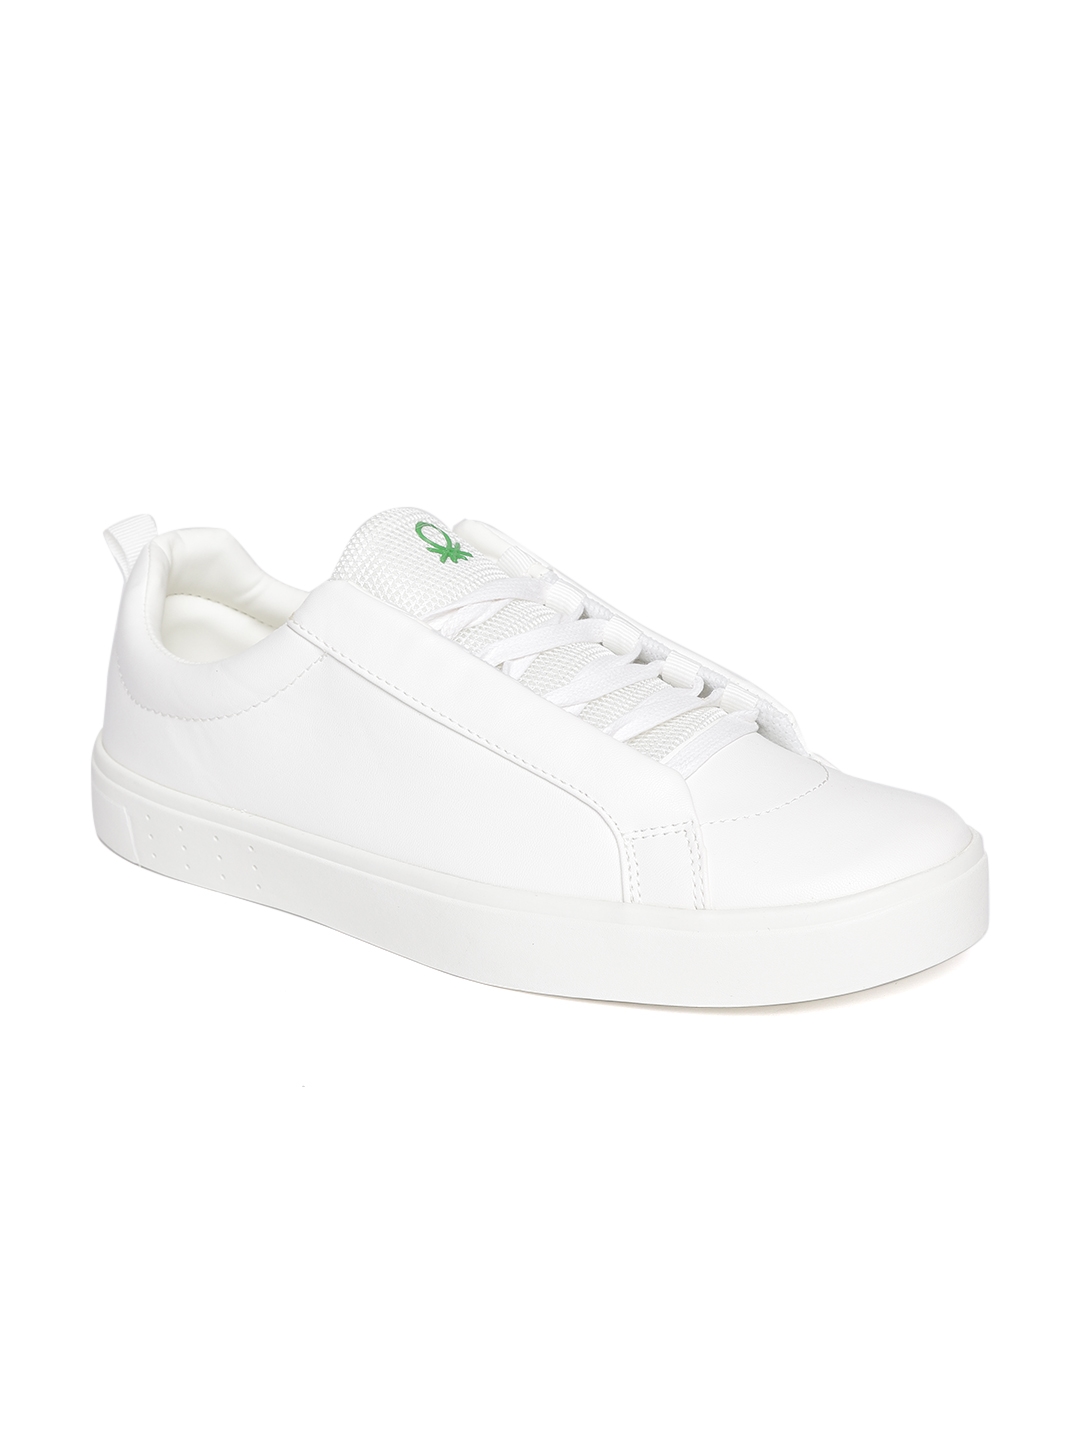 united colors of benetton white sneakers shoes